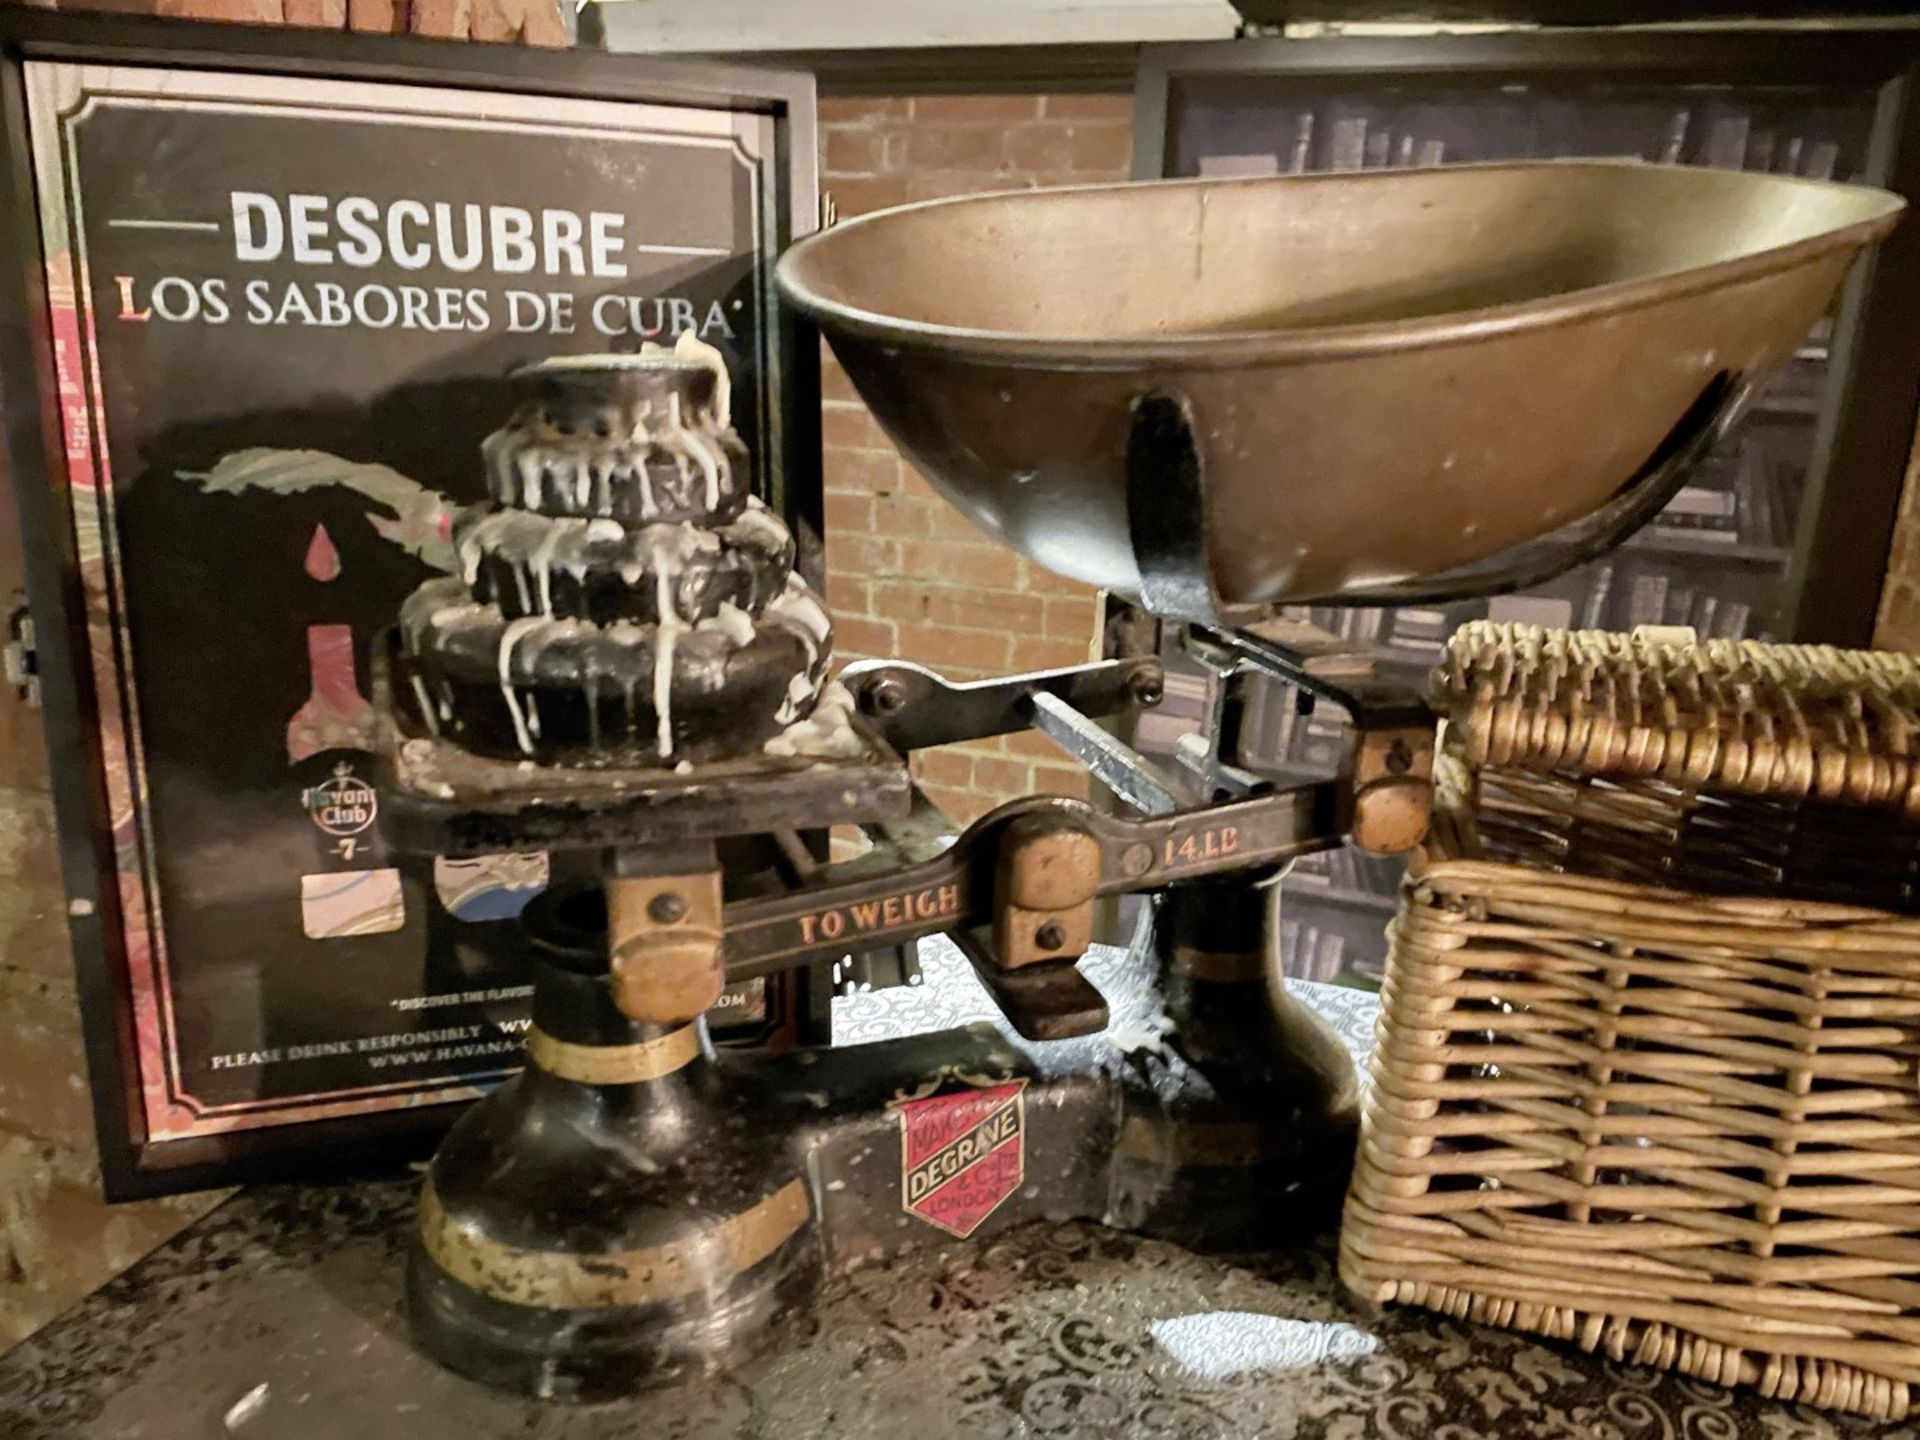 Mixed Lot Including Vintage Kitchen Scales, Framed Image and a Selection of Retro Glassware - Image 3 of 4